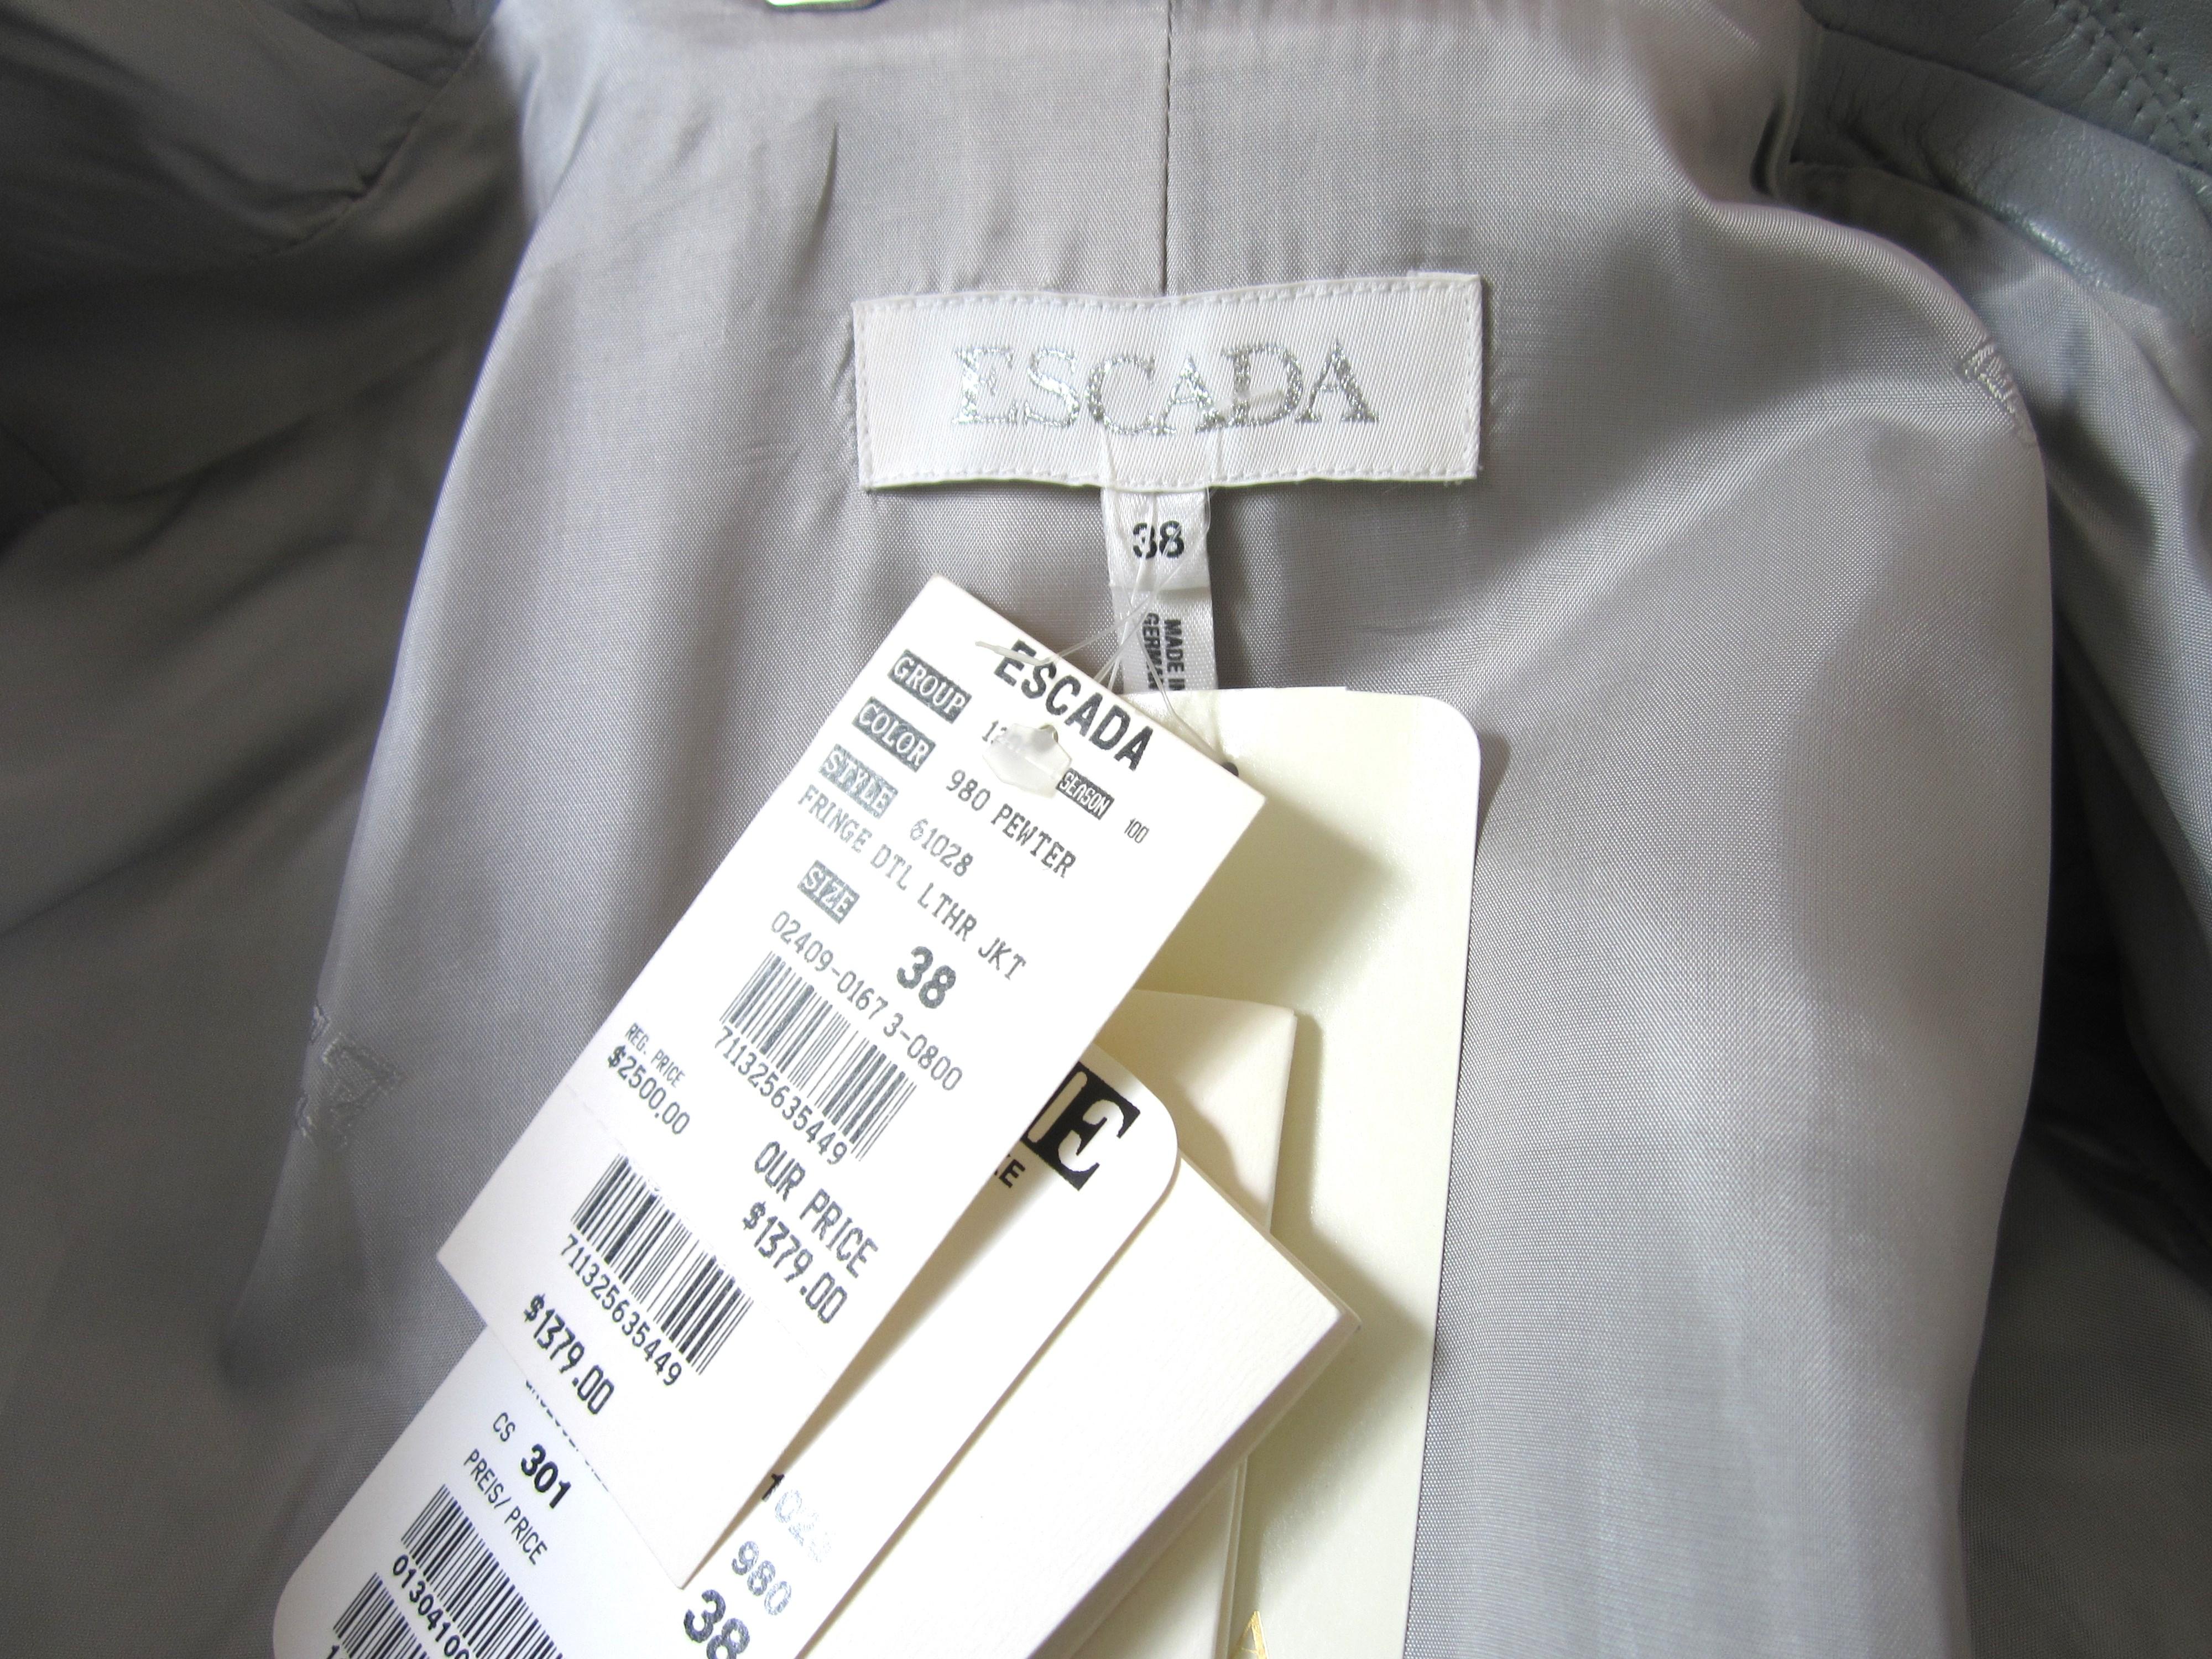  Escada Leather Jacket Pants - Western Motif Grey Suit New With Tags 1990s  For Sale 2